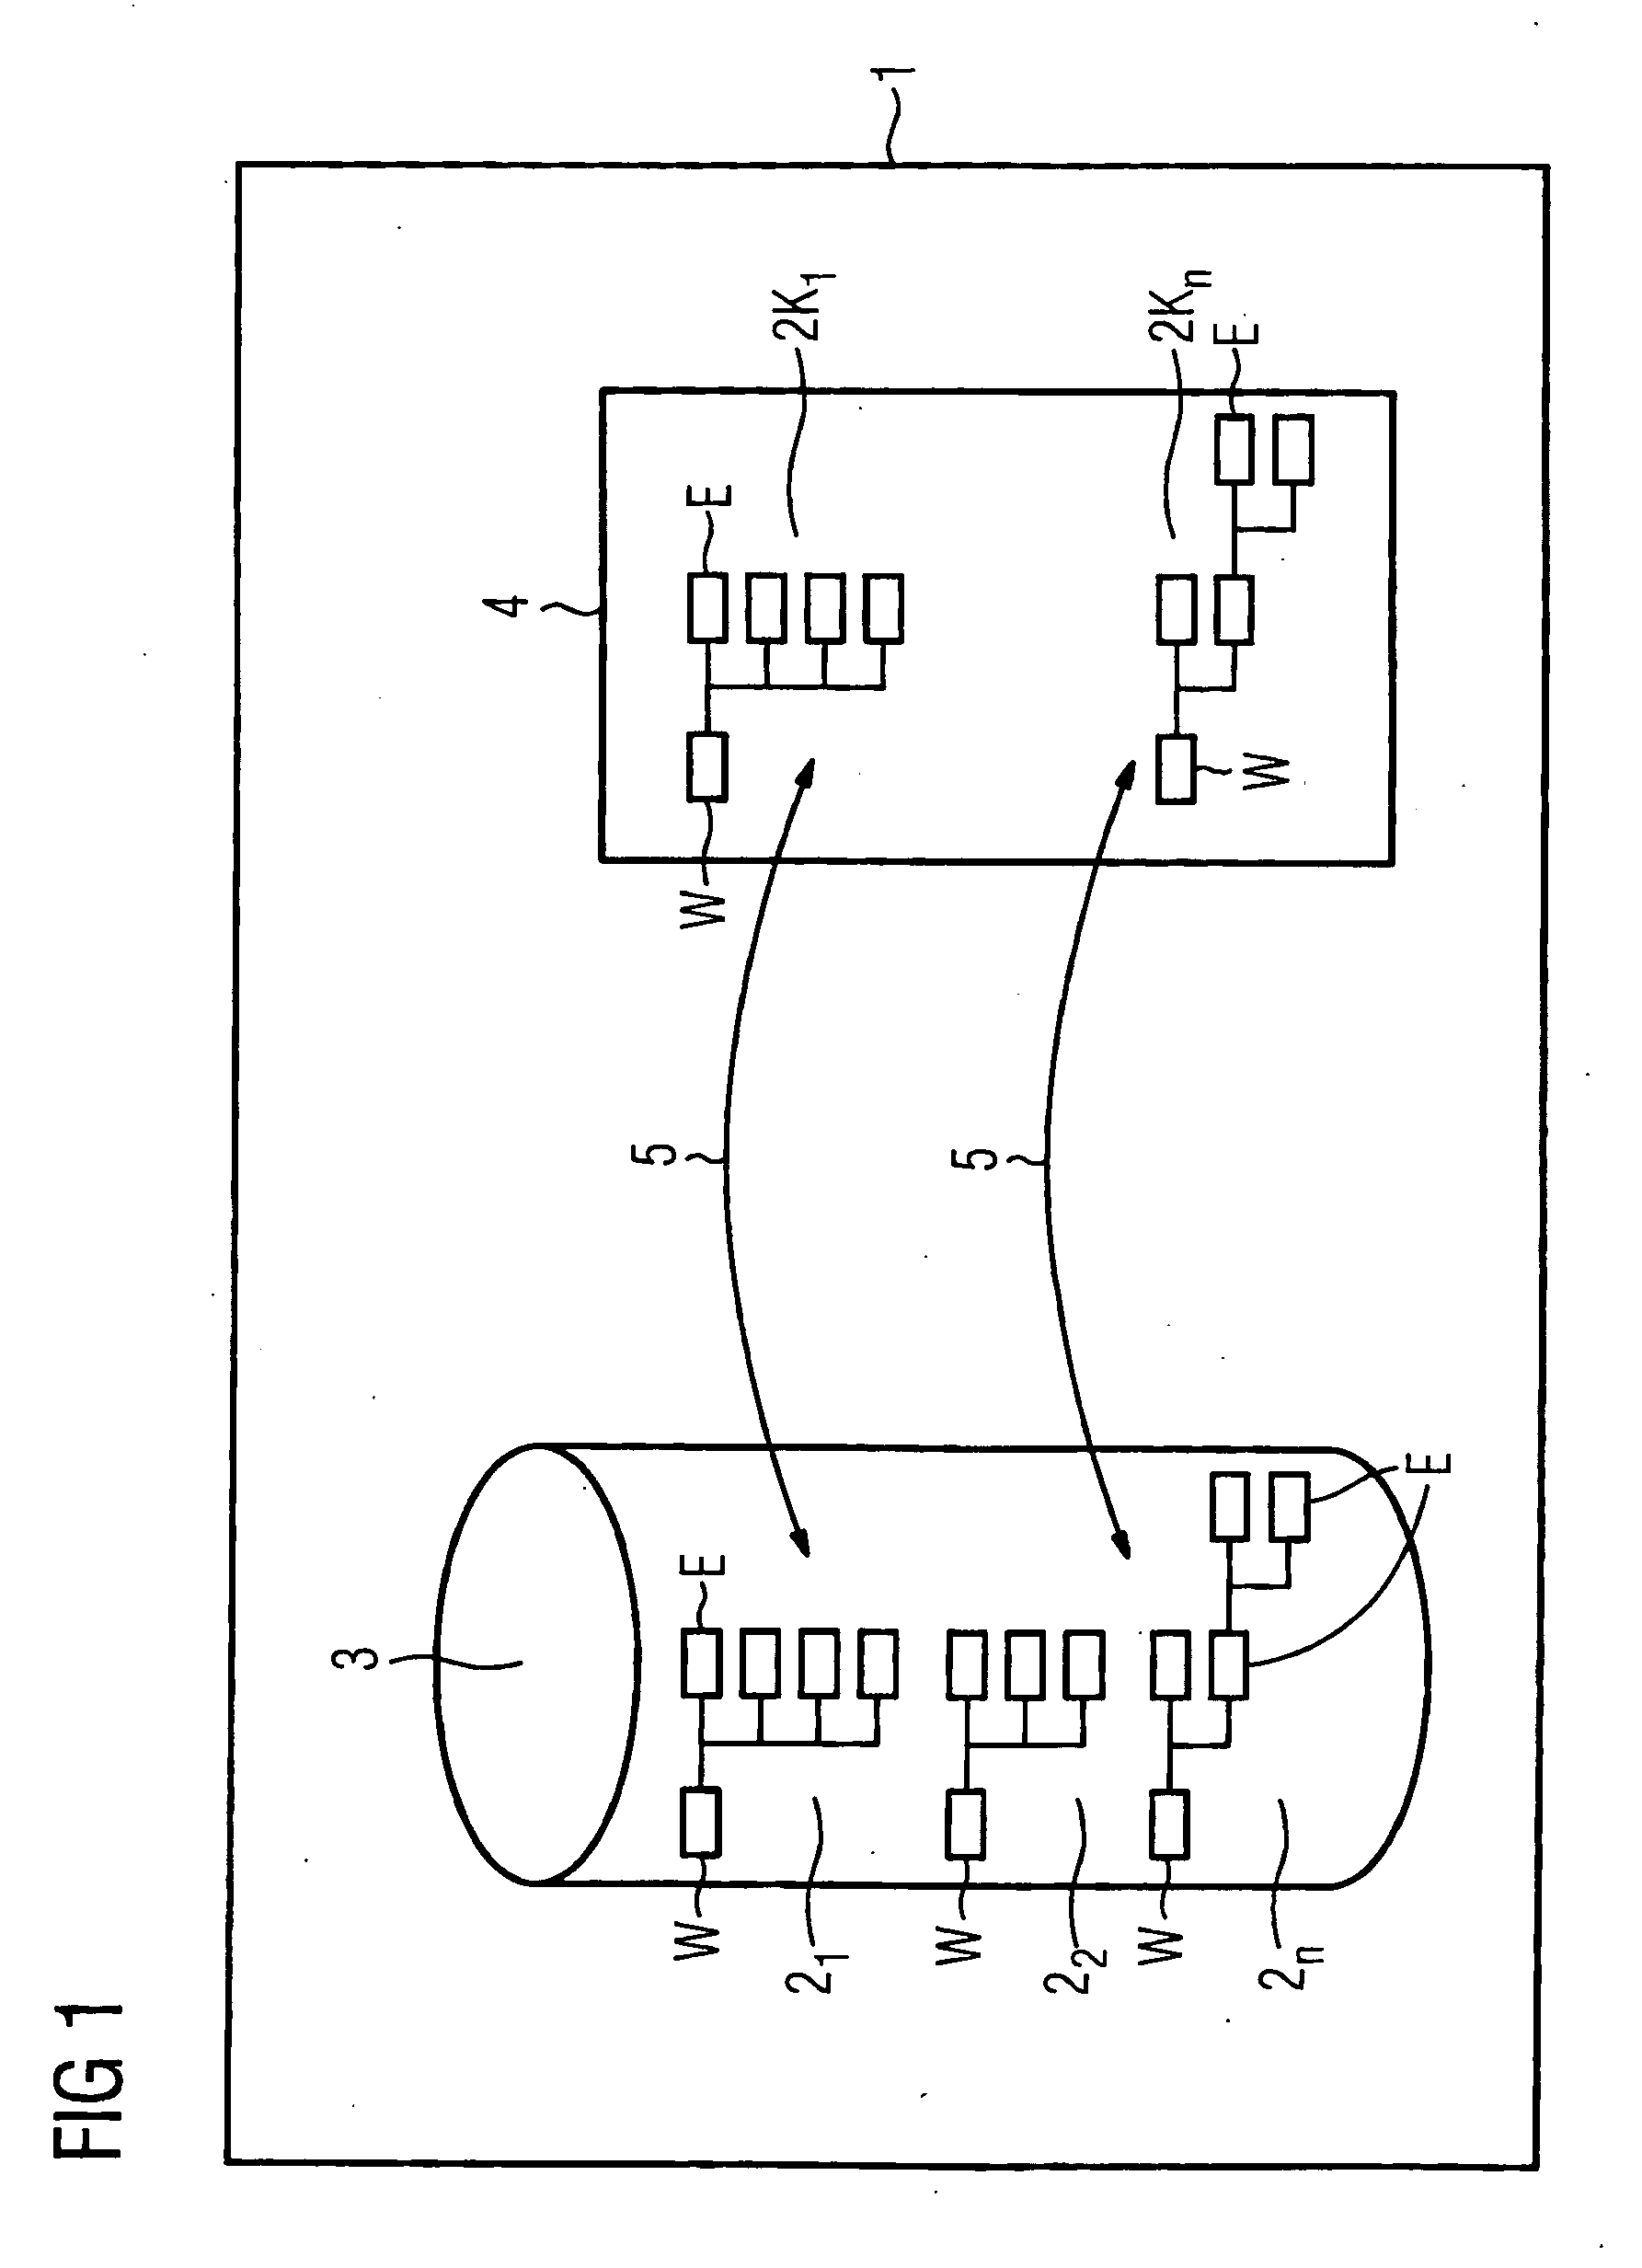 System and method for reusing project planning data